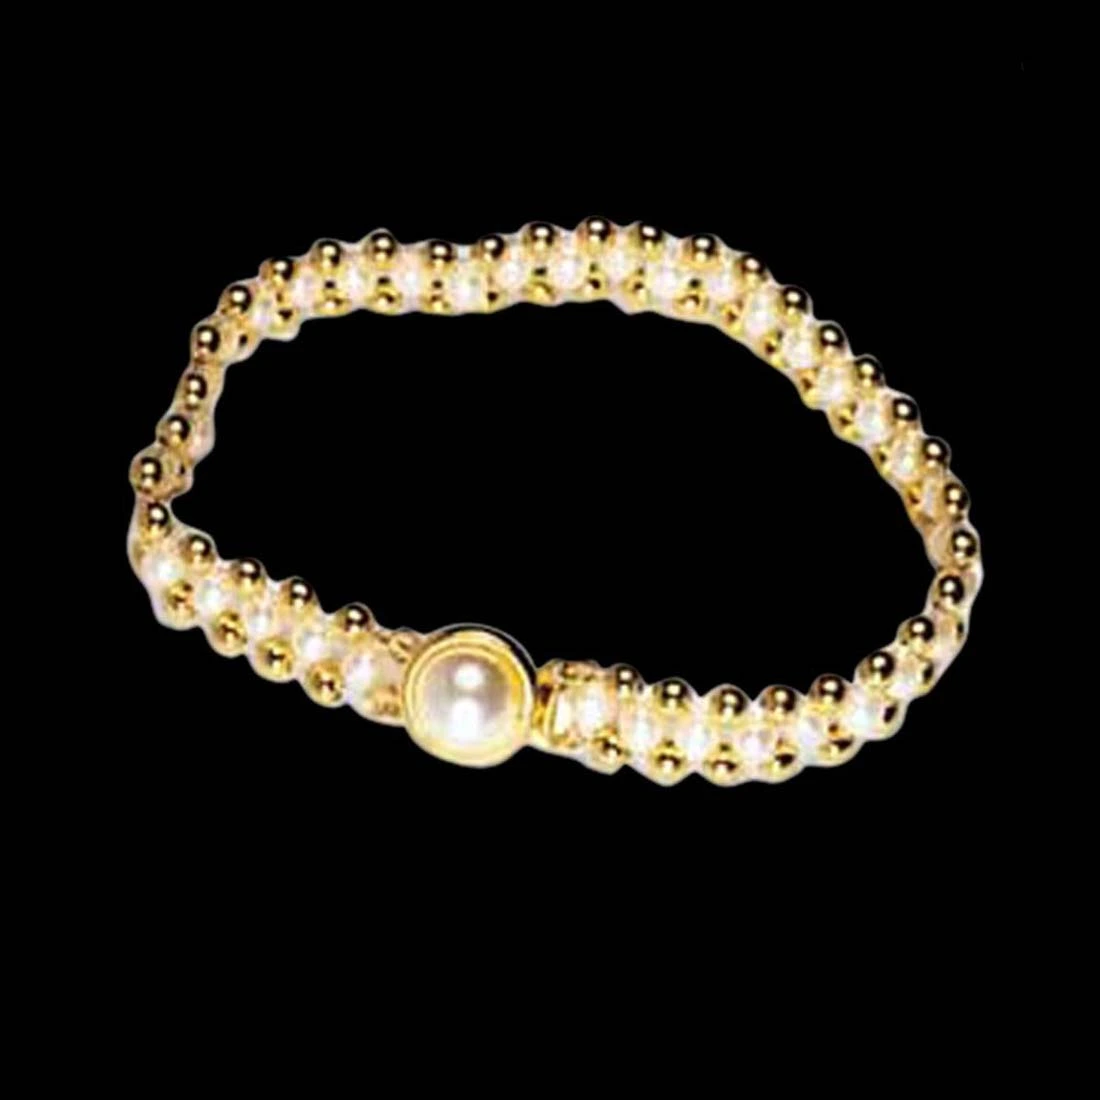 Enchanting Elegance Pearls - Real Freshwater Pearl & Gold Plated Beads Necklace, Bracelet & Earring Set for Women (SP96)